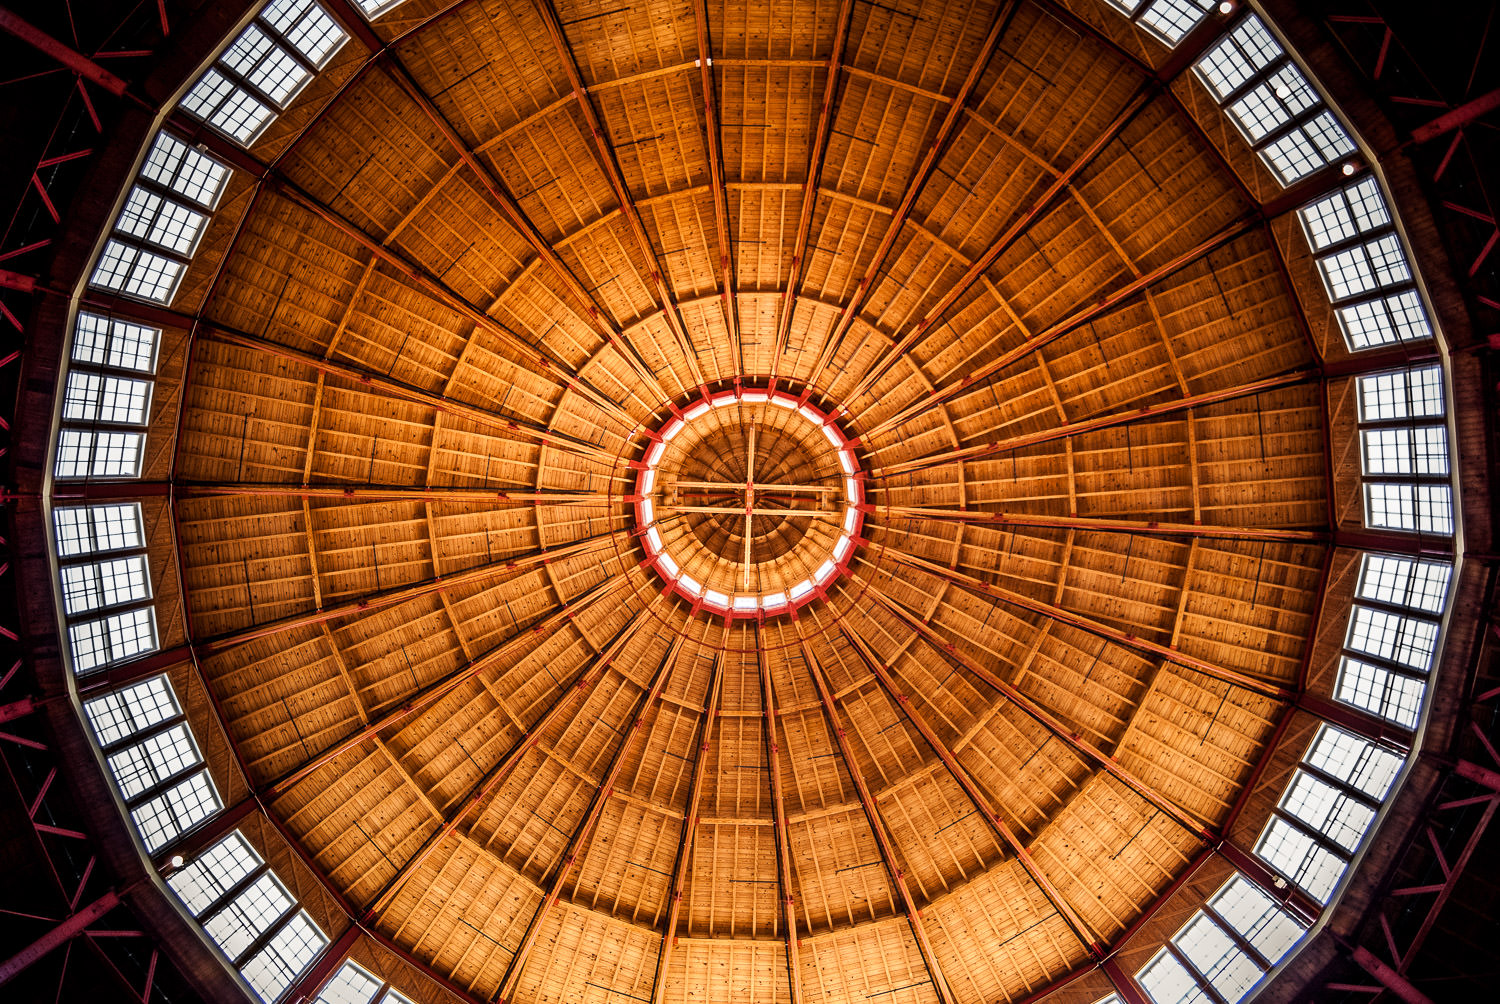 Ceiling Light - B&O, B&O Railroad Museum, Baltimore, Maryland, USA, abstract, architecture, travel